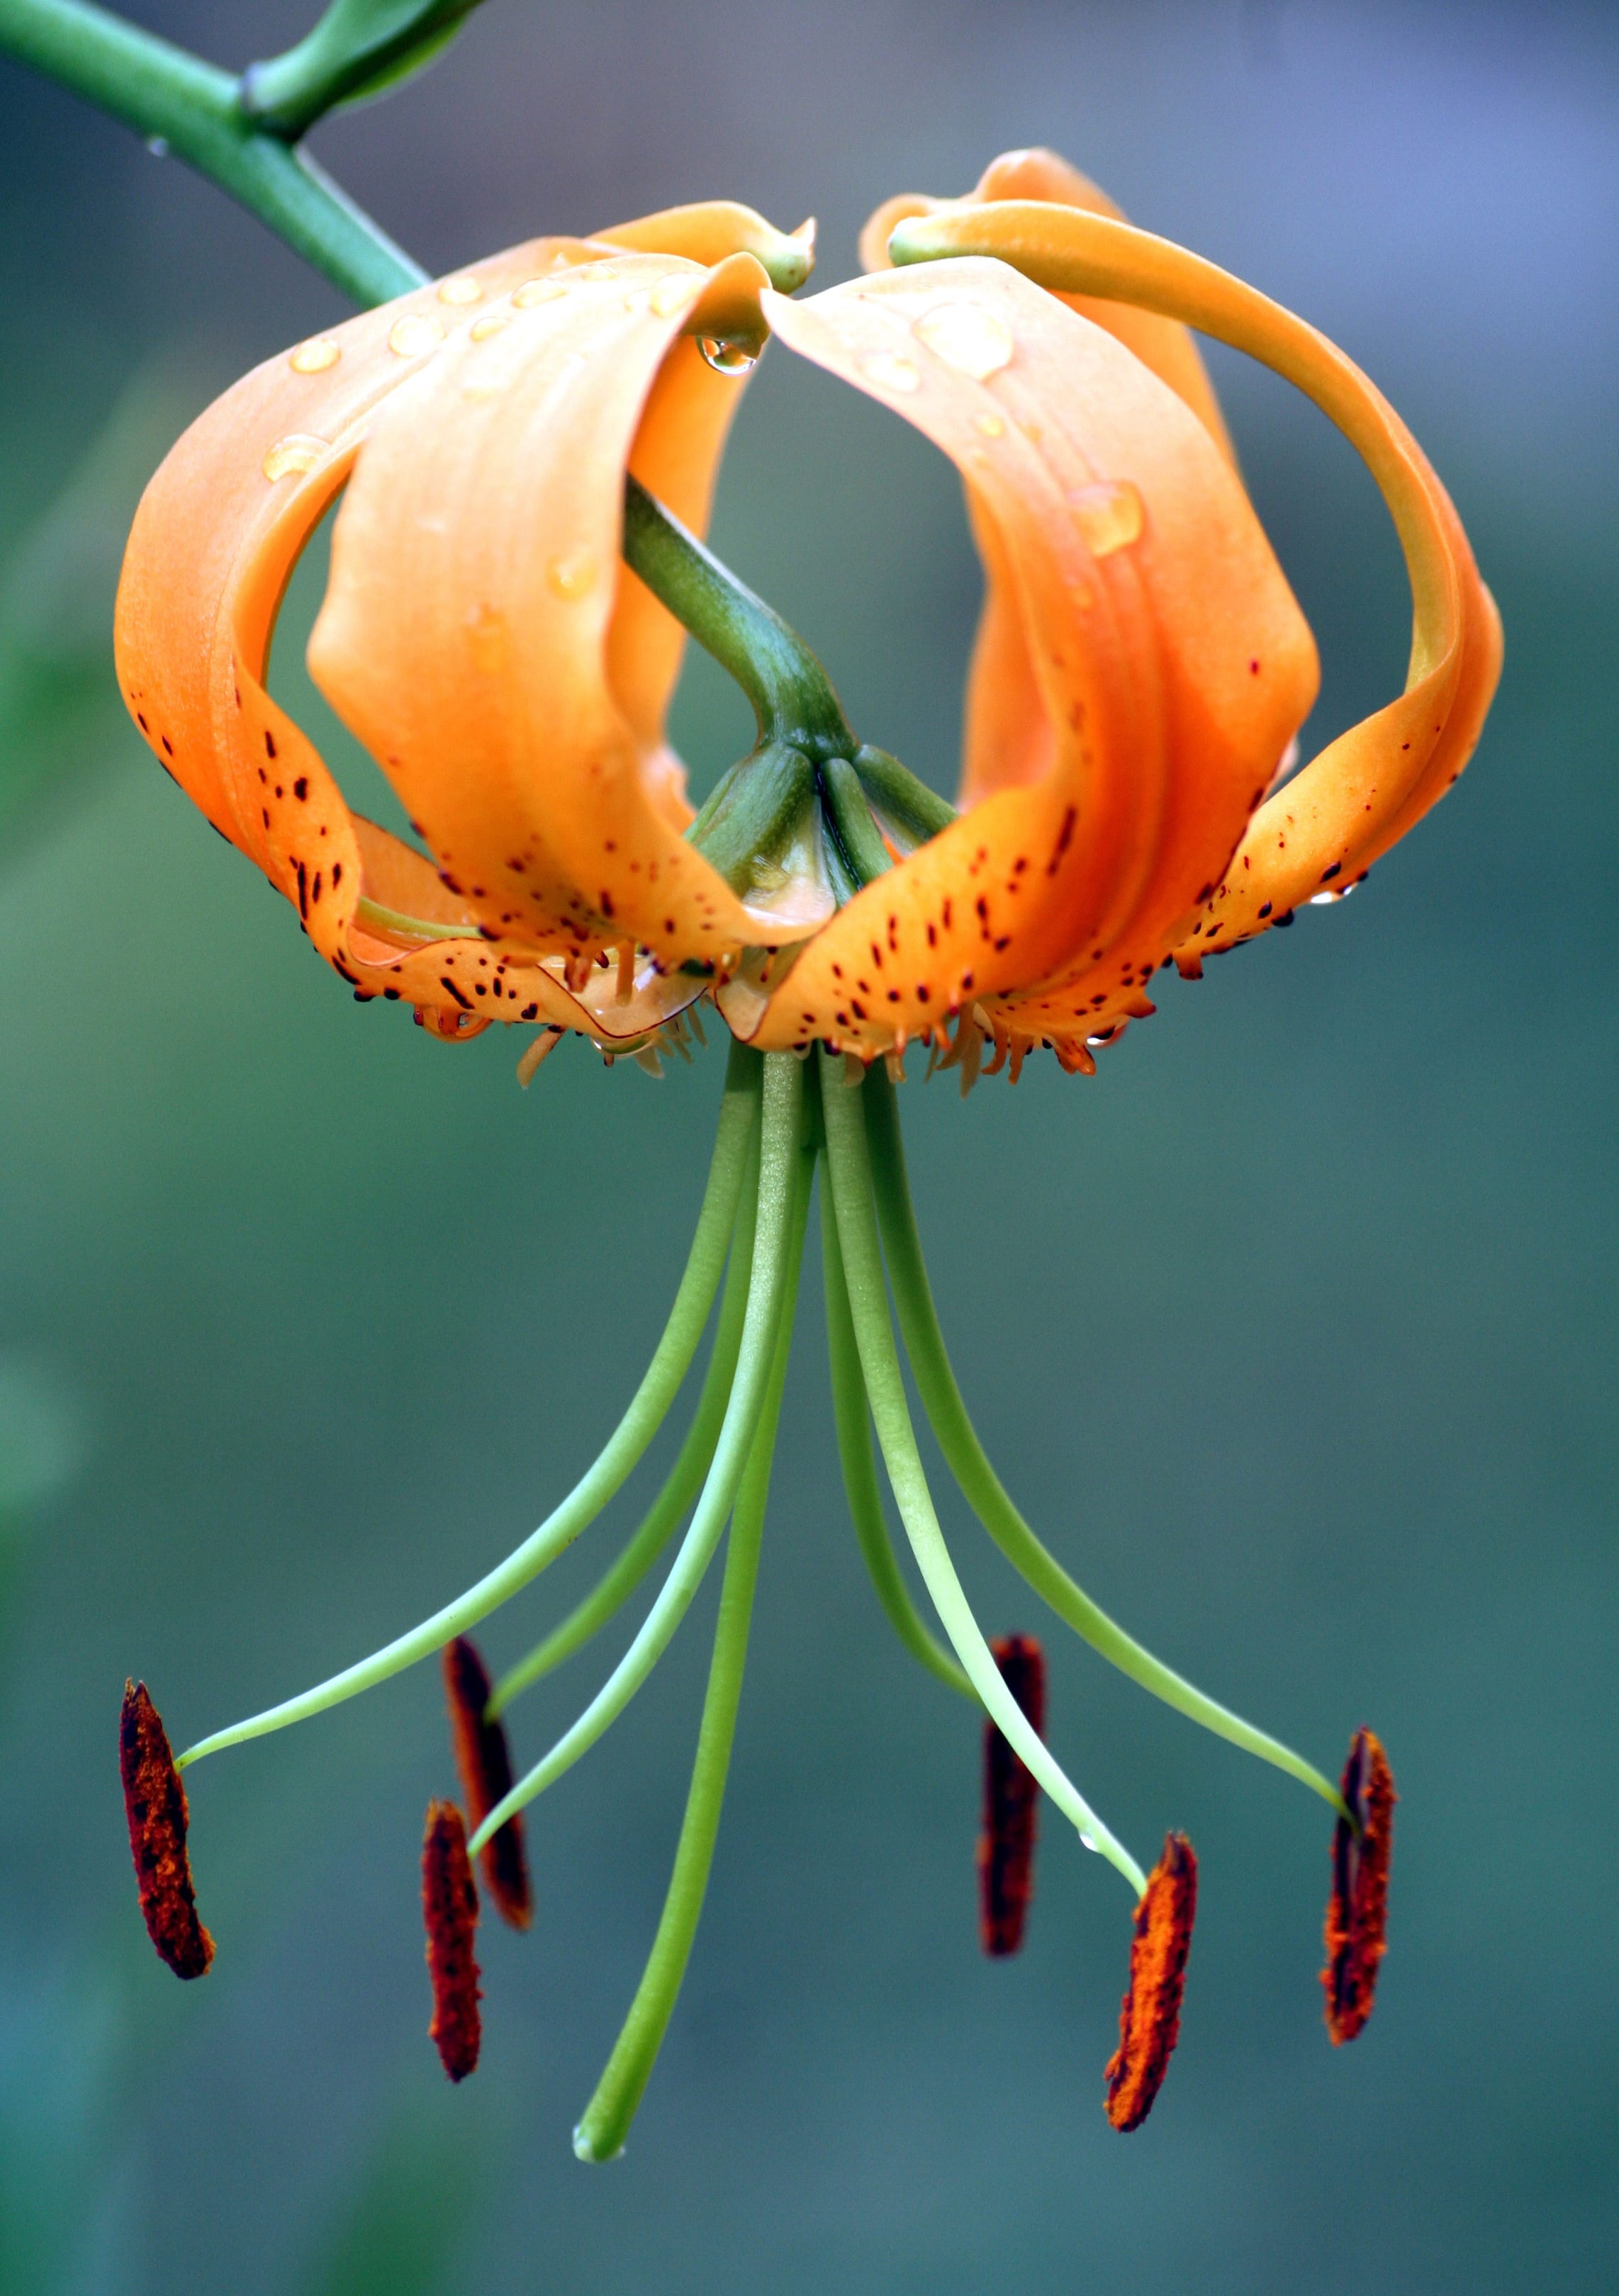 Tiger Lily After Rain